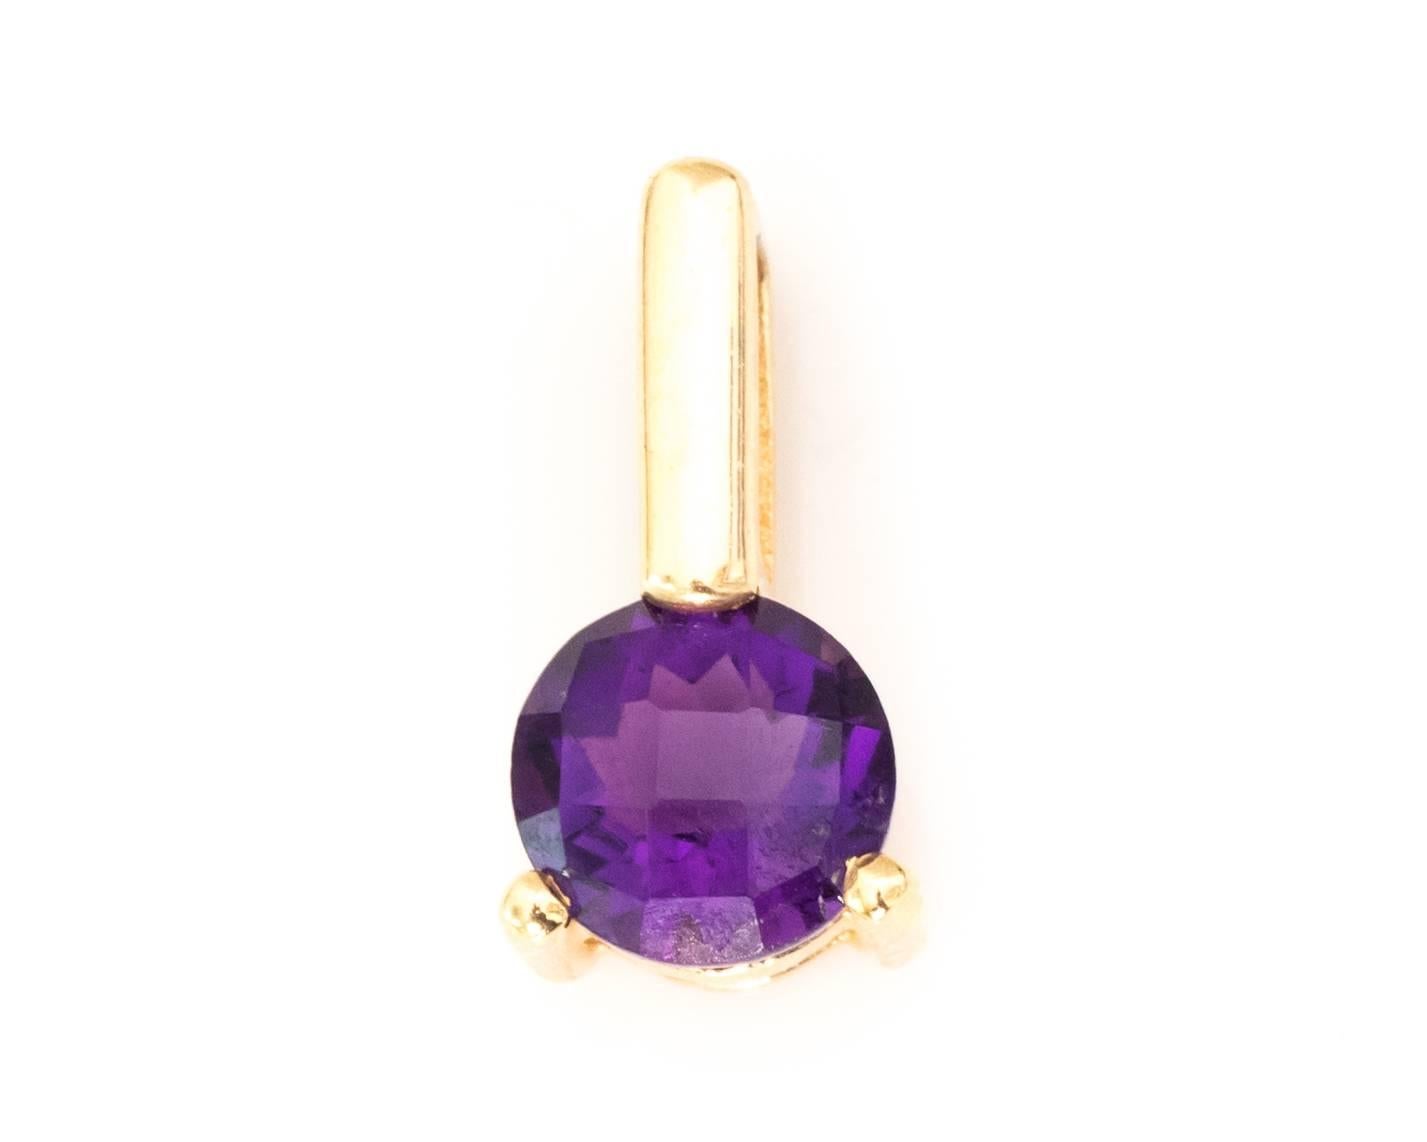 Custom Made Charm from the 1950s
Features a Gorgeous Purple Amethyst in the center of the pendant
Amethyst has a checkered board cut pattern on it's round frame with a lovely deep purple hue. It is held by 2 prong's and a bail loop on top. 